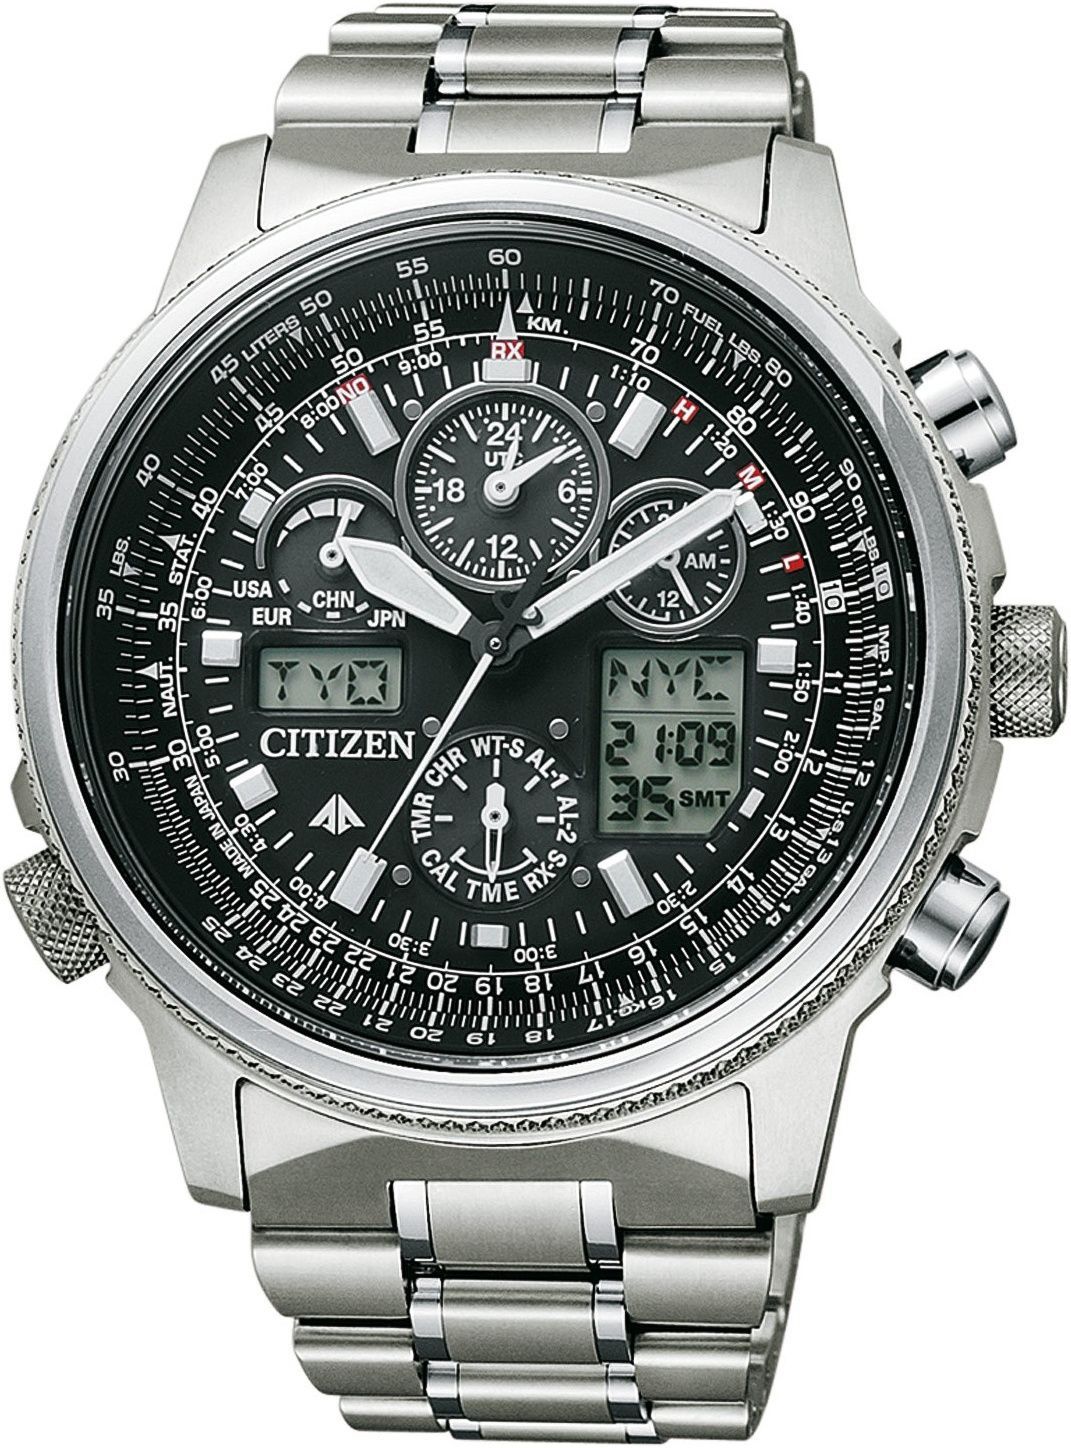 This Citizen Promaster Skyhawk Analogue-Digital Watch for Men is the perfect timepiece to wear or to gift. It's Silver 45 mm Round case combined with the comfortable Silver Titanium watch band will ensure you enjoy this stunning timepiece without any compromise. Operated by a high quality Eco-Drive movement and water resistant to 20 bars, your watch will keep ticking. This high quality sporty watch is solar powered (Recharged by any light source; no need for ever a battery)  - The watch has a Calendar function: Day-Date, Solar Powered, Radio Controlled, Stop Watch, Worldtime,Stop Watch High quality 19 cm length and 23 mm width Silver Titanium strap with a Fold over with push button clasp Case diameter: 45 mm,case thickness: 14 mm, case colour: Silver and dial colour: Black